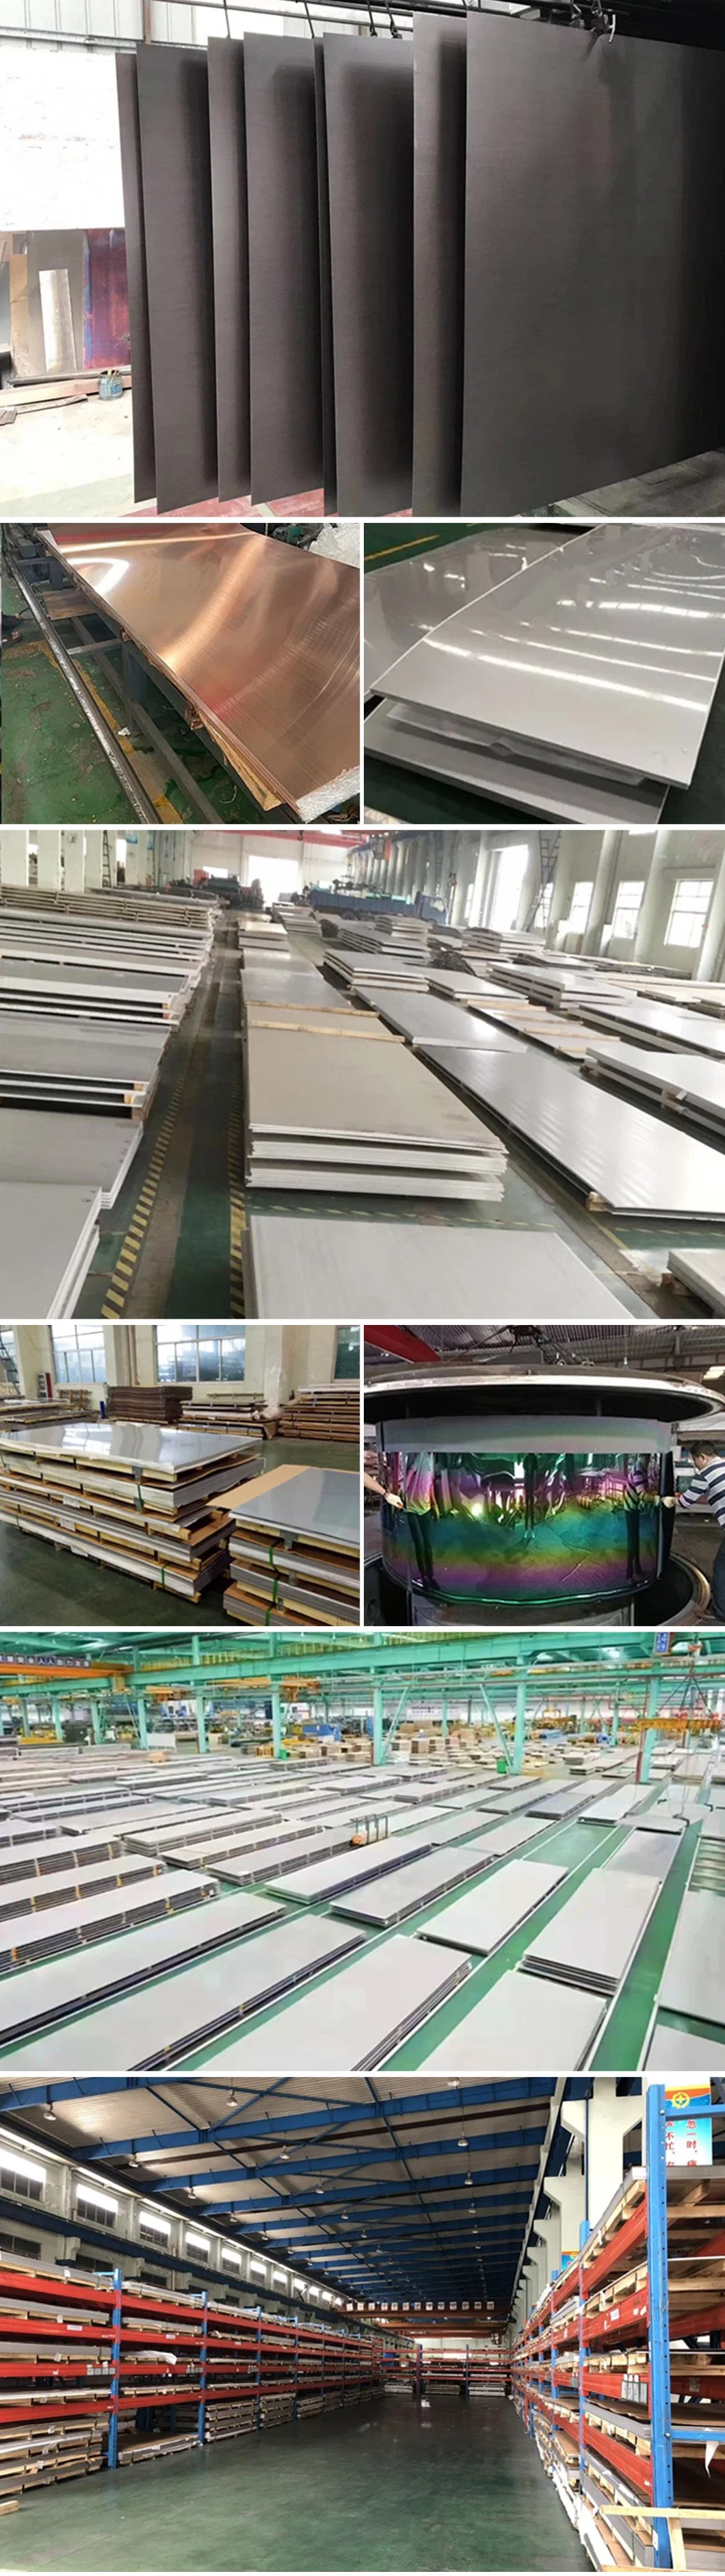 0.6-1.5mm Thick 0.5m 0.8m 1m 1.5m Width Water Ripple Stainless Steel Sheet Applied in Decorative Wall Panels Plates